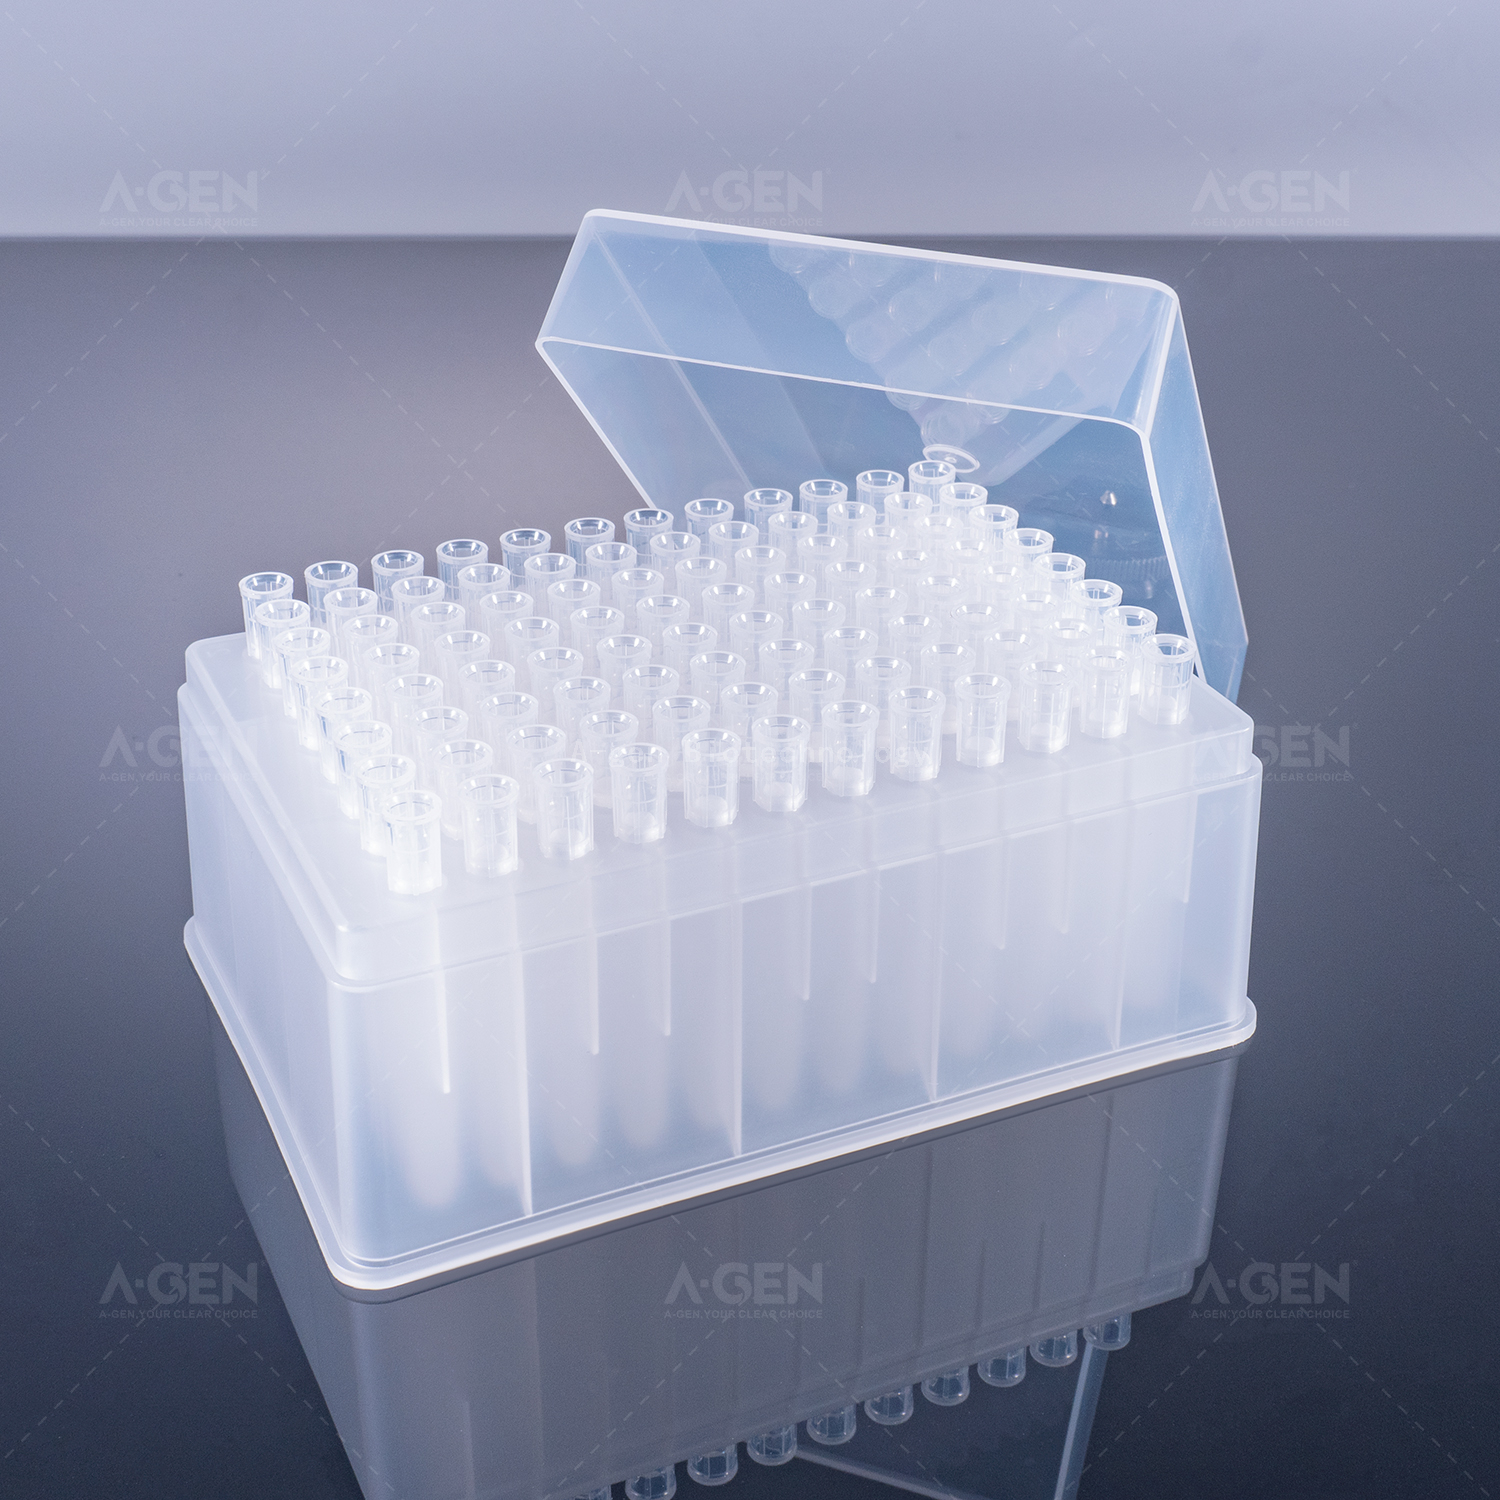 Nayo Tip 50μL Clear Robotic PP Pipette Tip (Racked,sterilized) for DNA/RNA Extraction with Filter FXF-50-RSL Low Residual